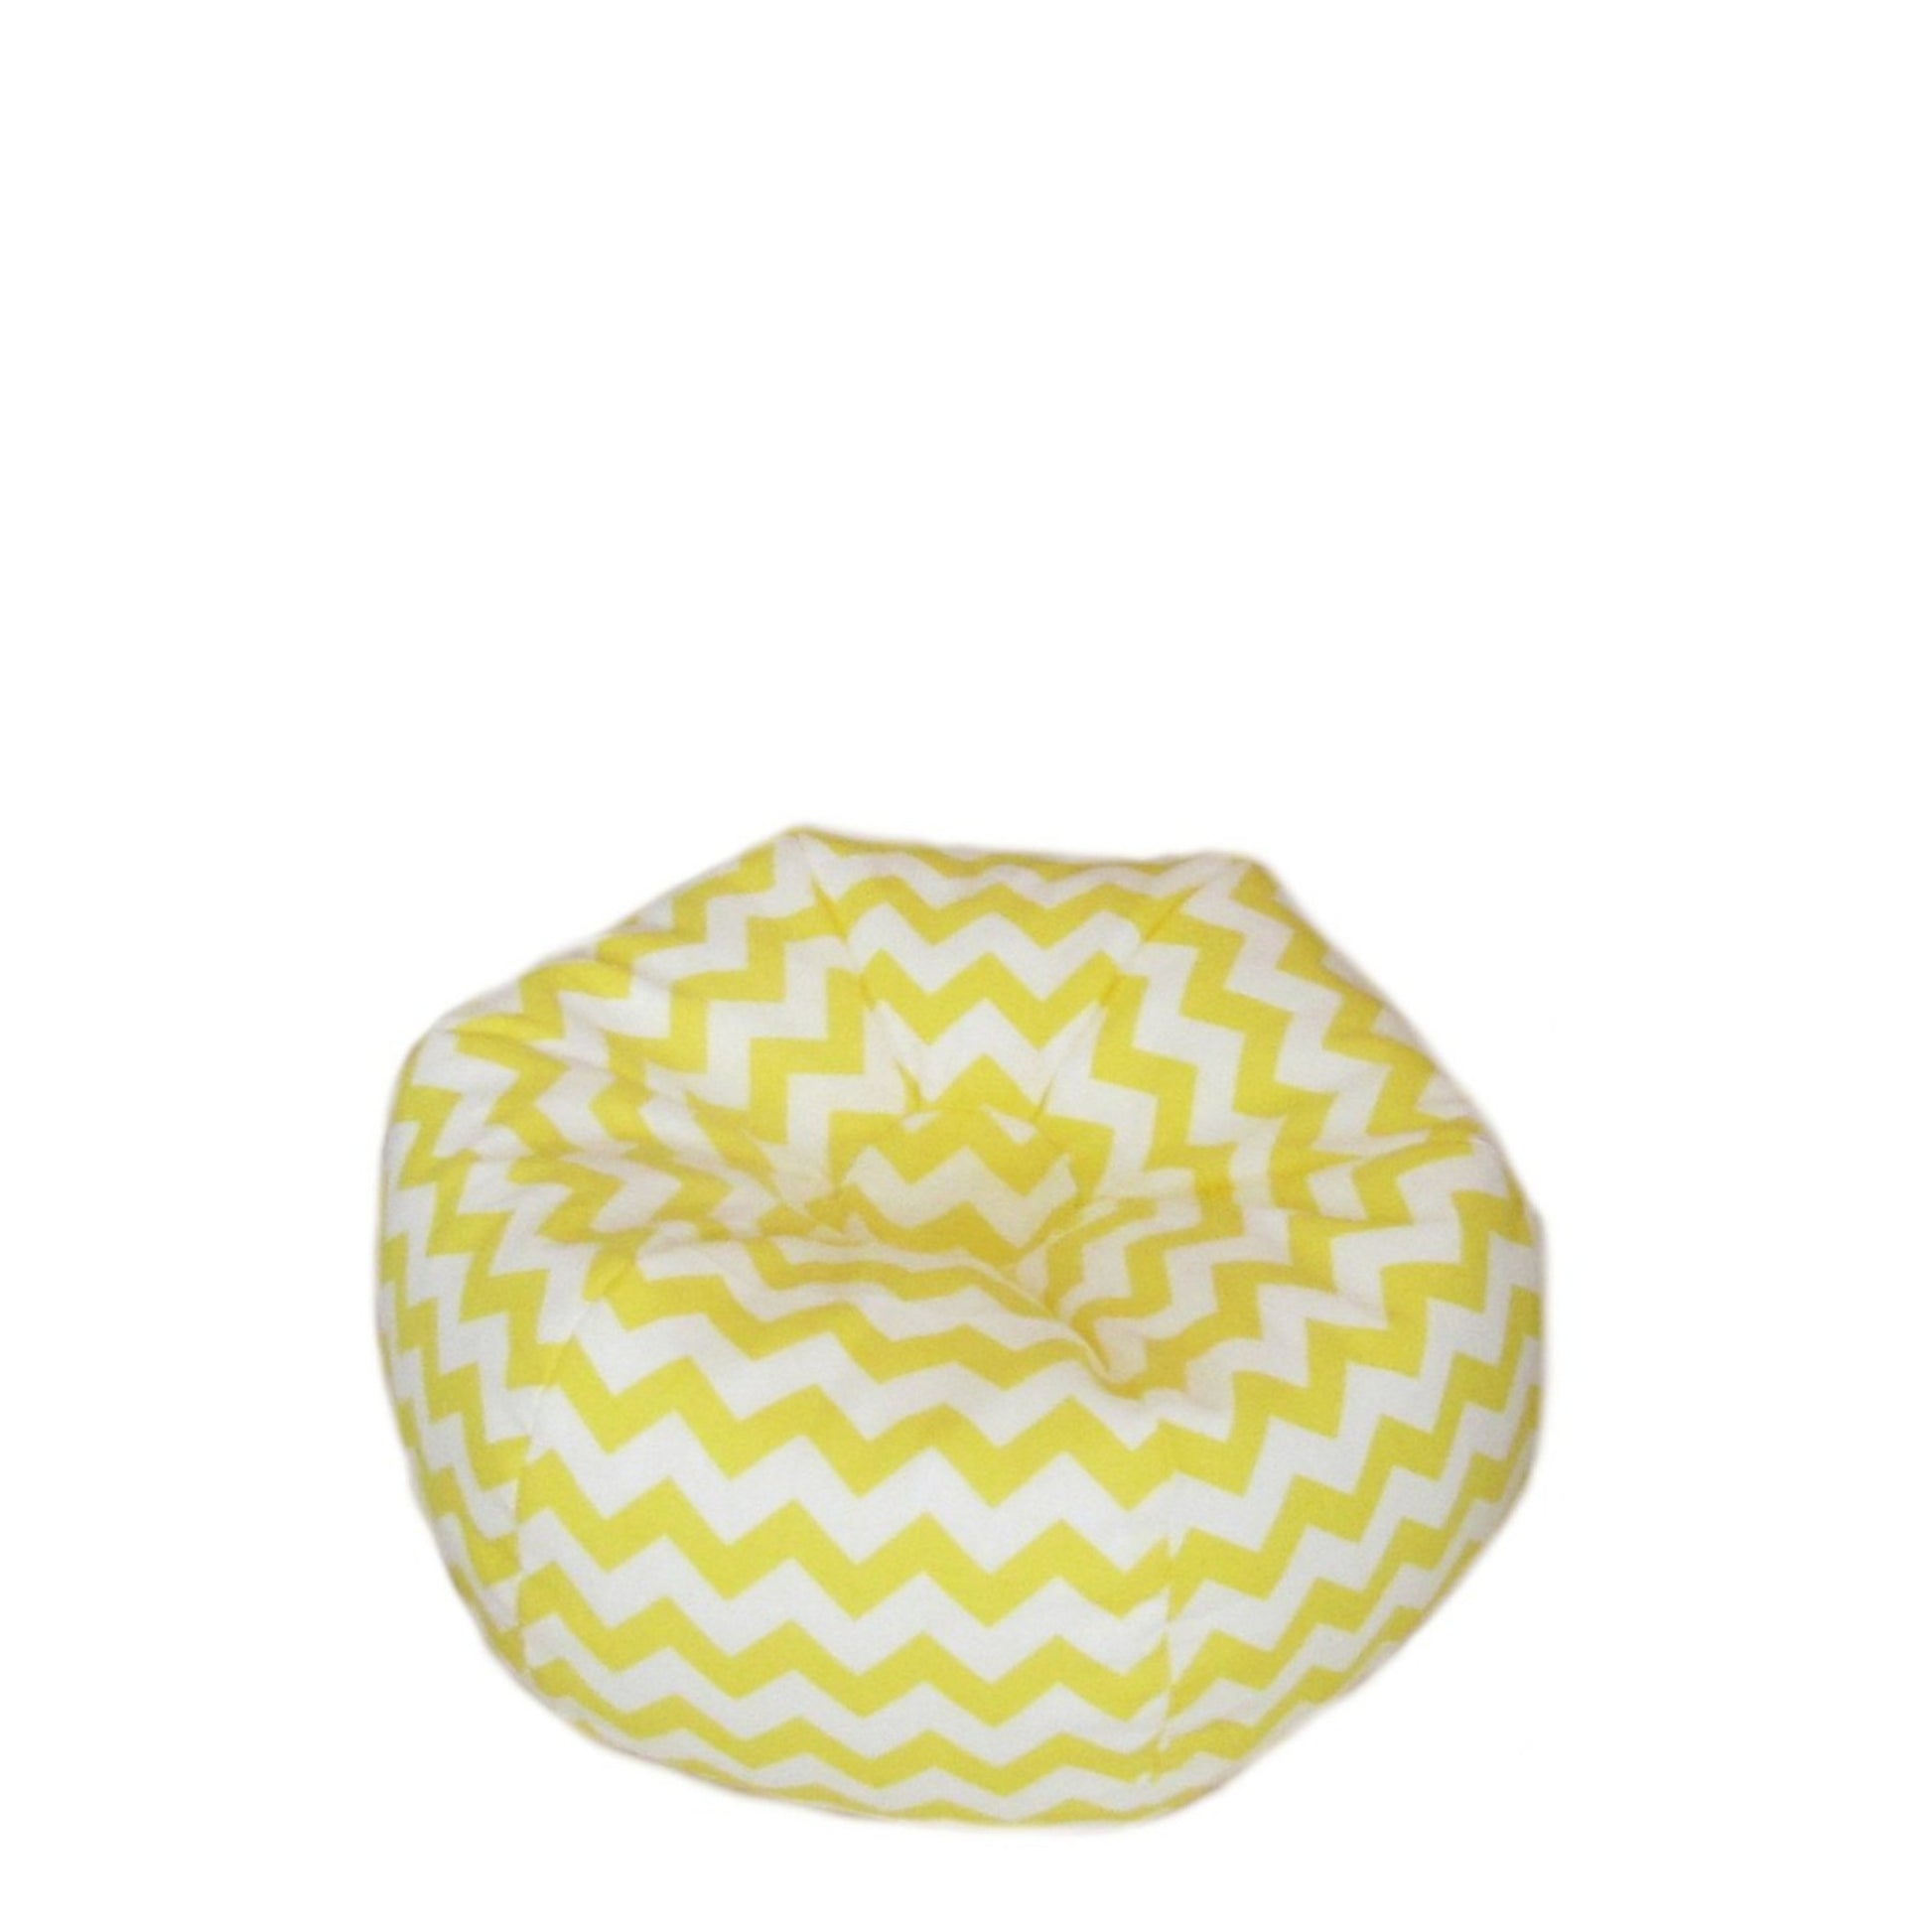 Yellow Chevron Doll Bean Bag Chair for 18-inch dolls without doll